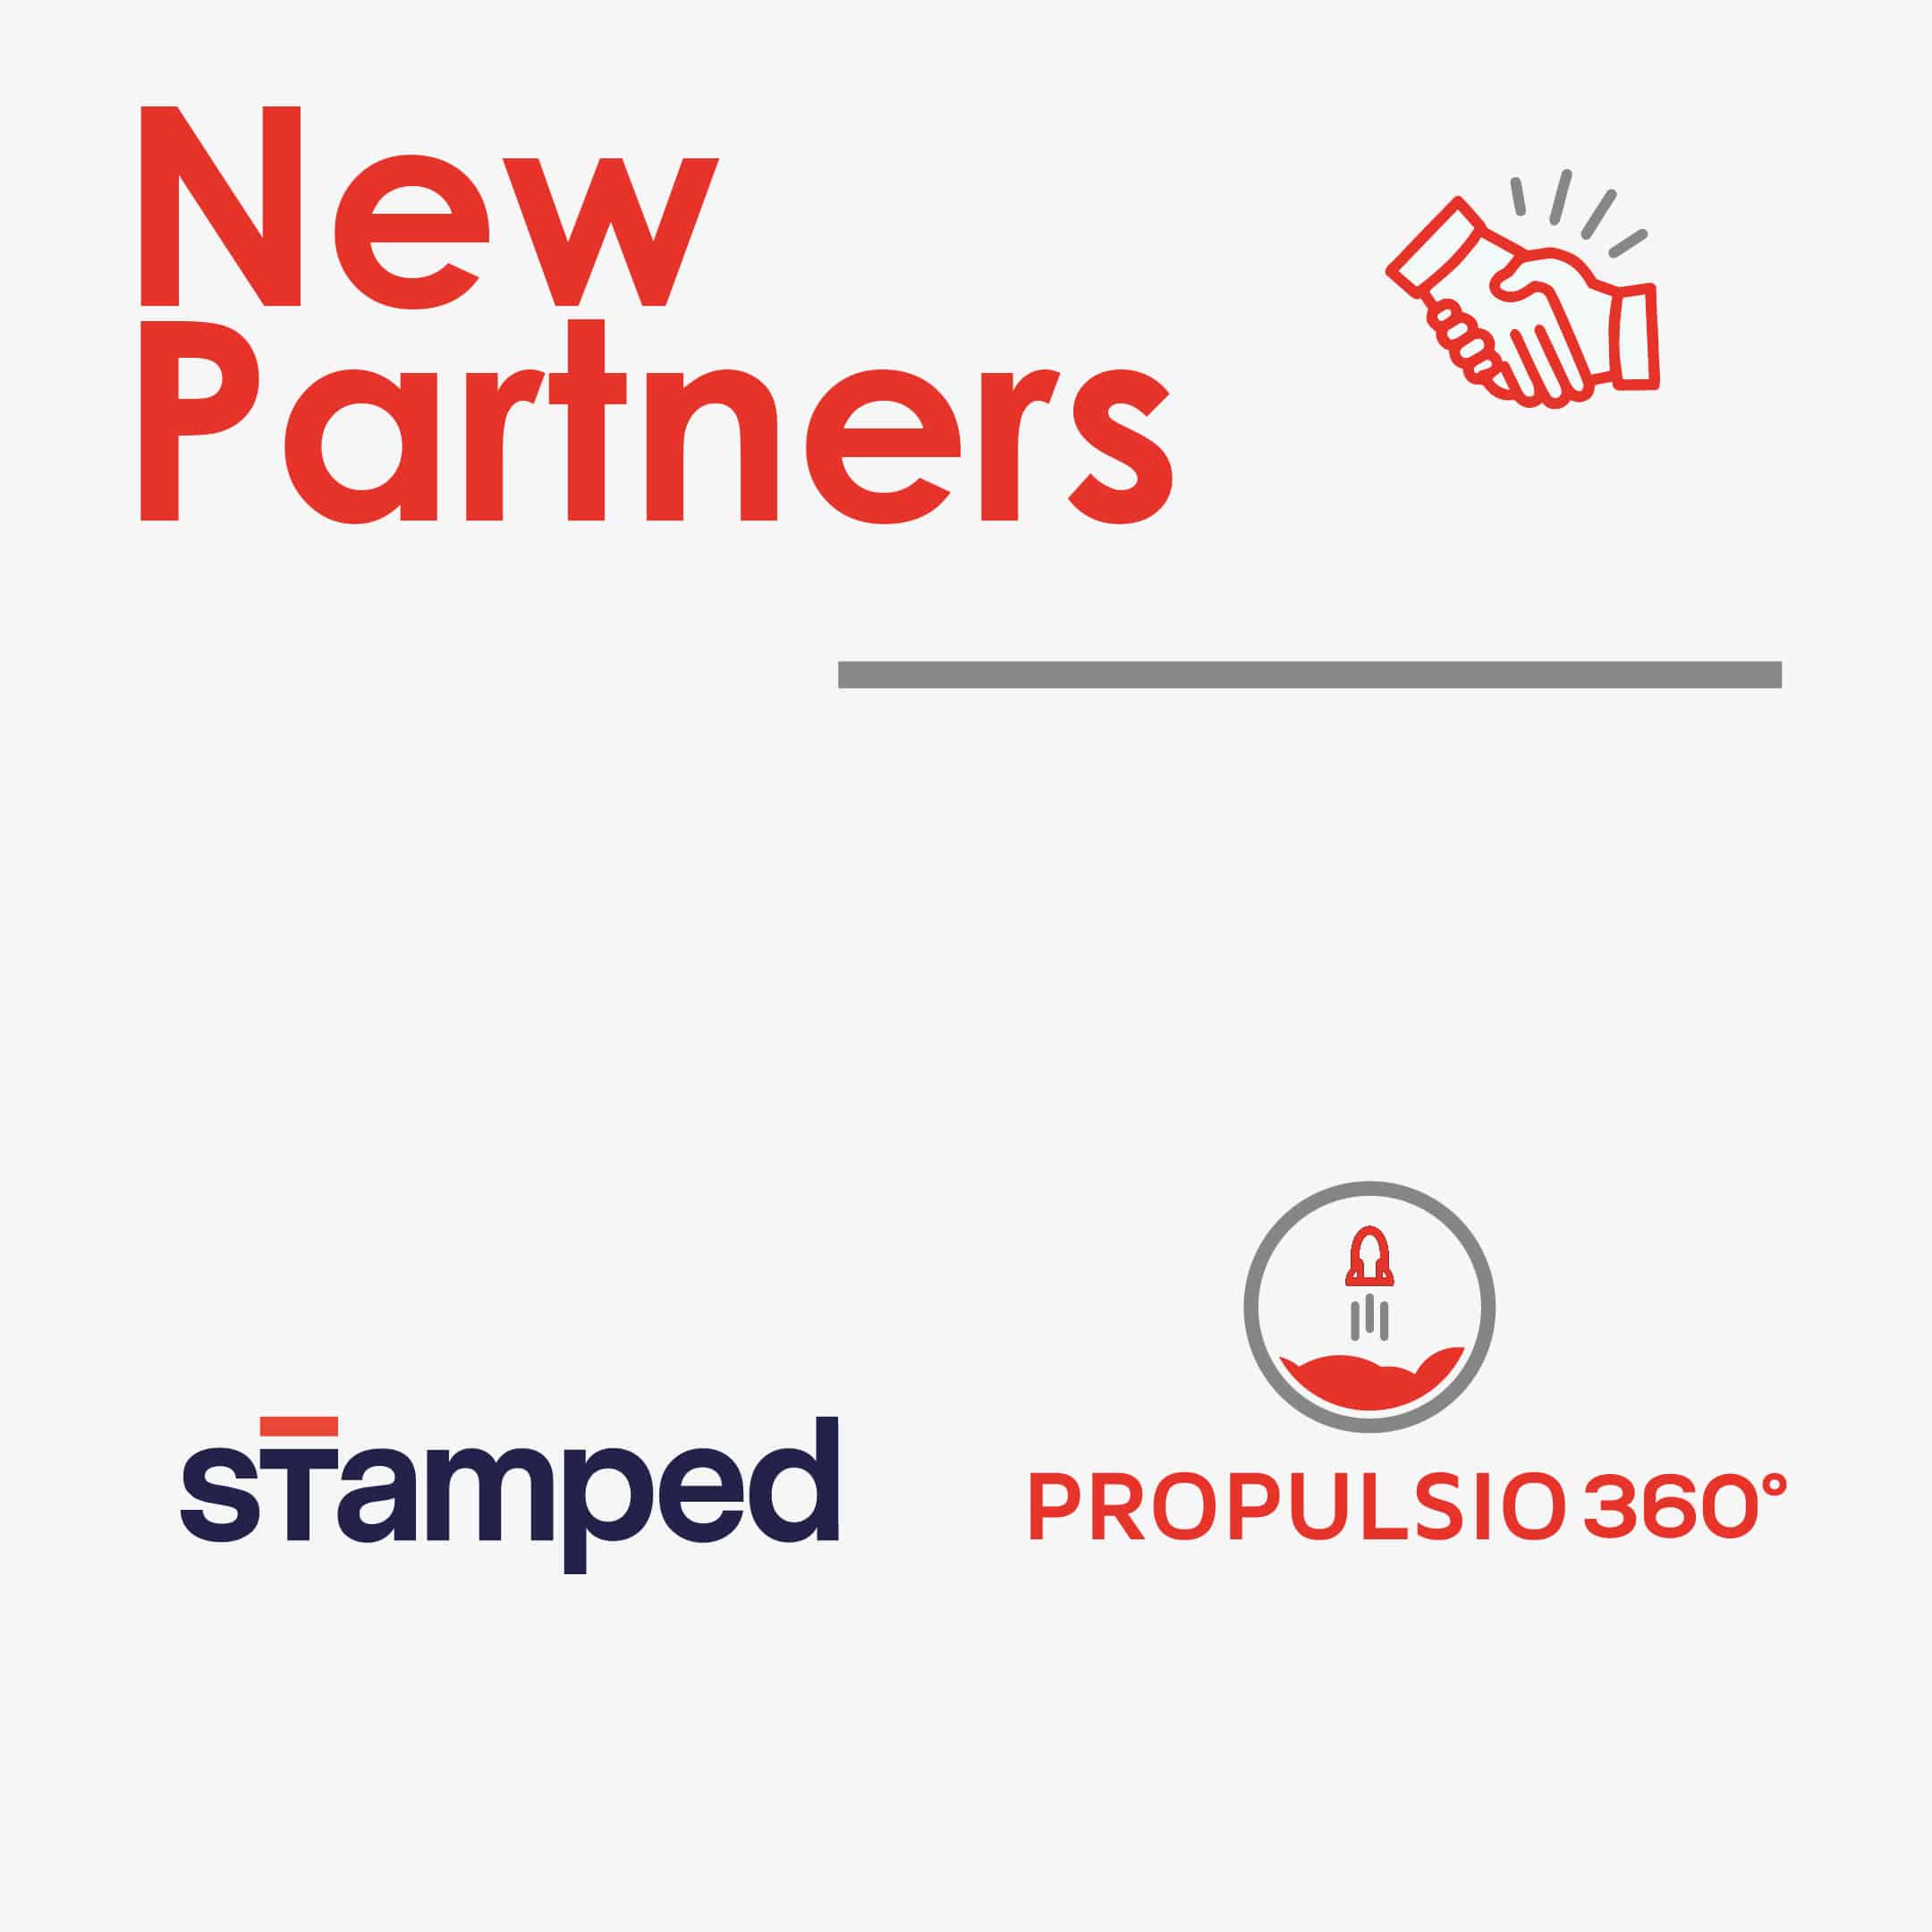 New Partner updated STAMPED